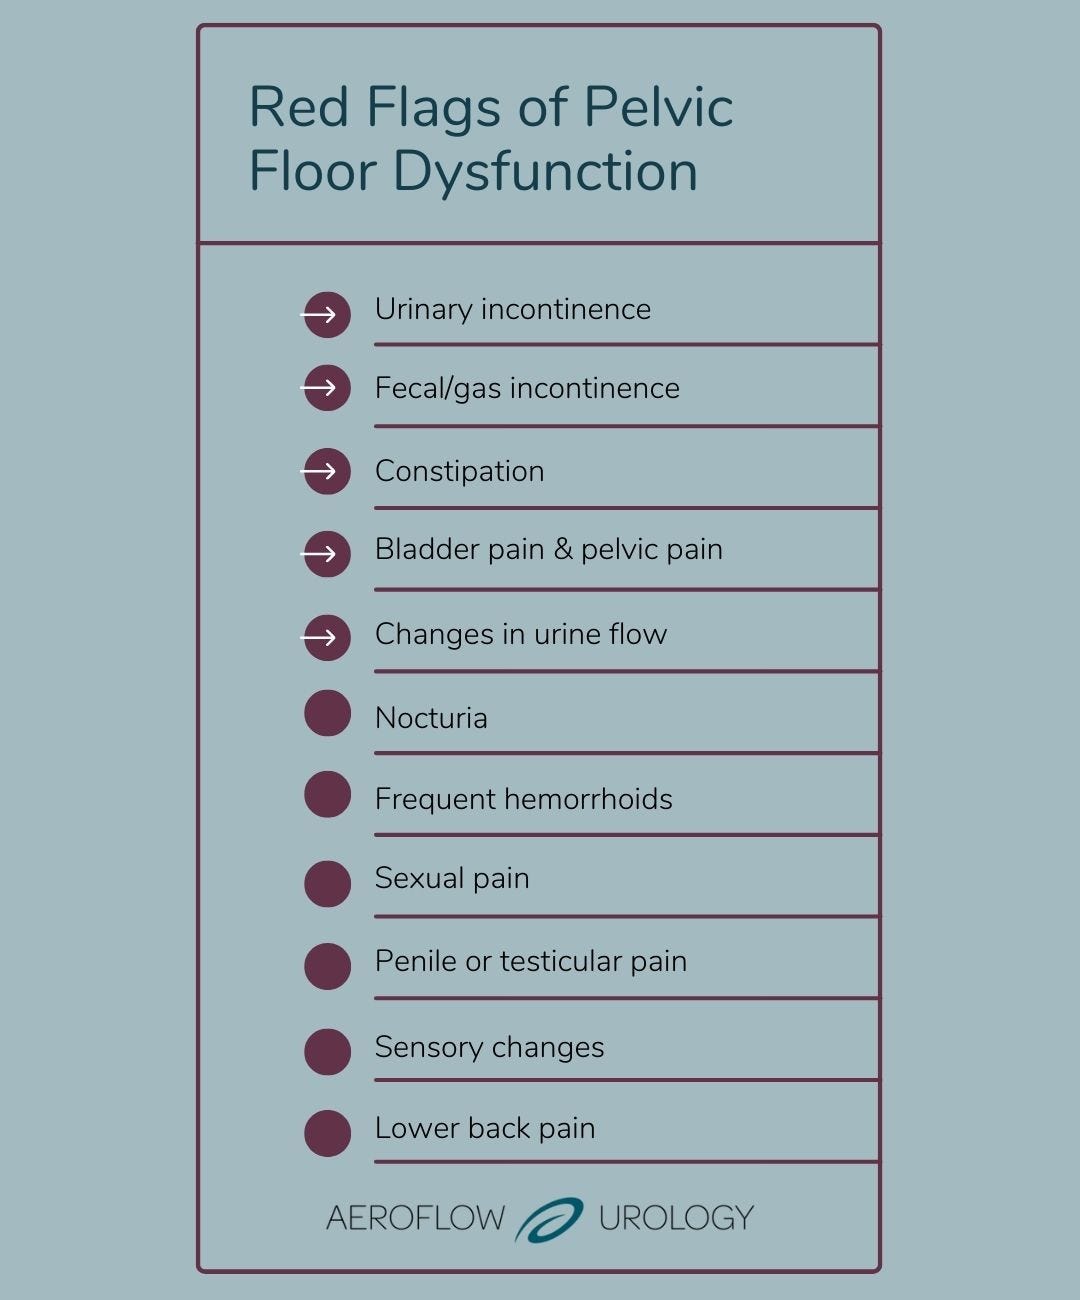 Red flags of pelvic floor dysfunction in males